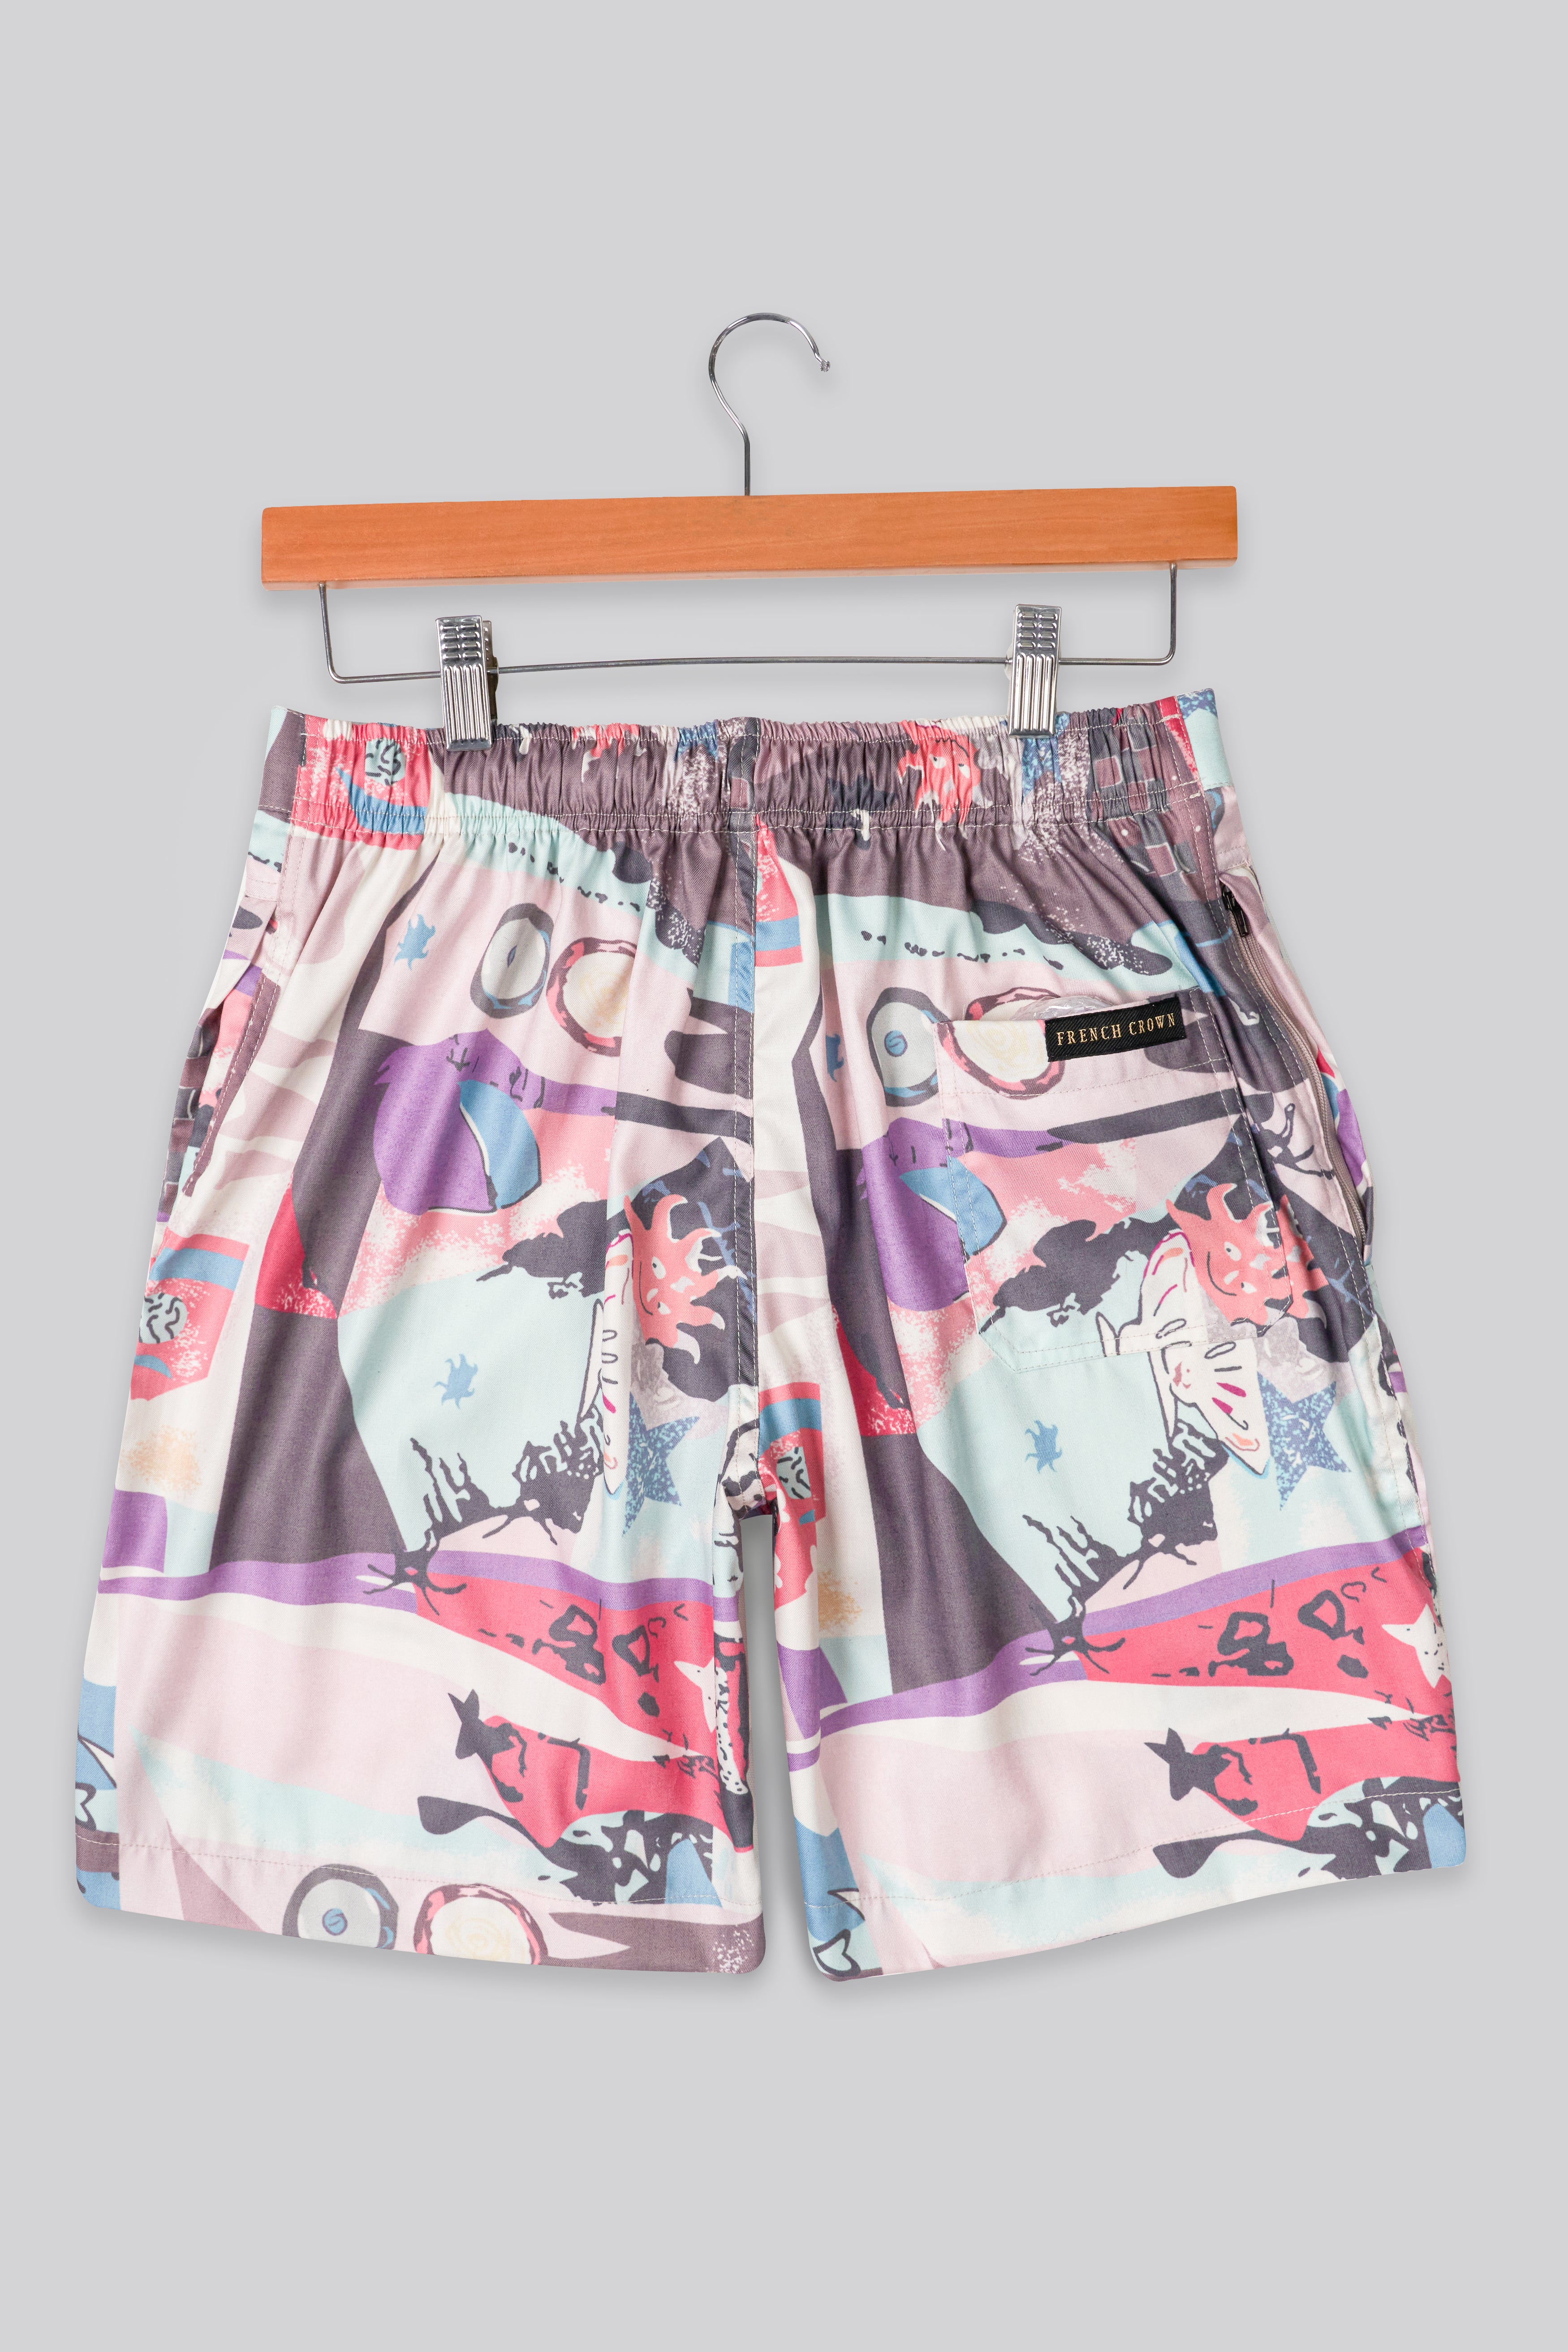 Flare Peach With Jordy Blue and Rouge Pink Abstract Printed Super Soft Premium Cotton Co-ord Sets 10577-CC-SS-SR-283-38, 10577-CC-SS-SR-283-39, 10577-CC-SS-SR-283-40, 10577-CC-SS-SR-283-42, 10577-CC-SS-SR-283-44, 10577-CC-SS-SR-283-46, 10577-CC-SS-SR-283-48, 10577-CC-SS-SR-283-50, 10577-CC-SS-SR-283-52